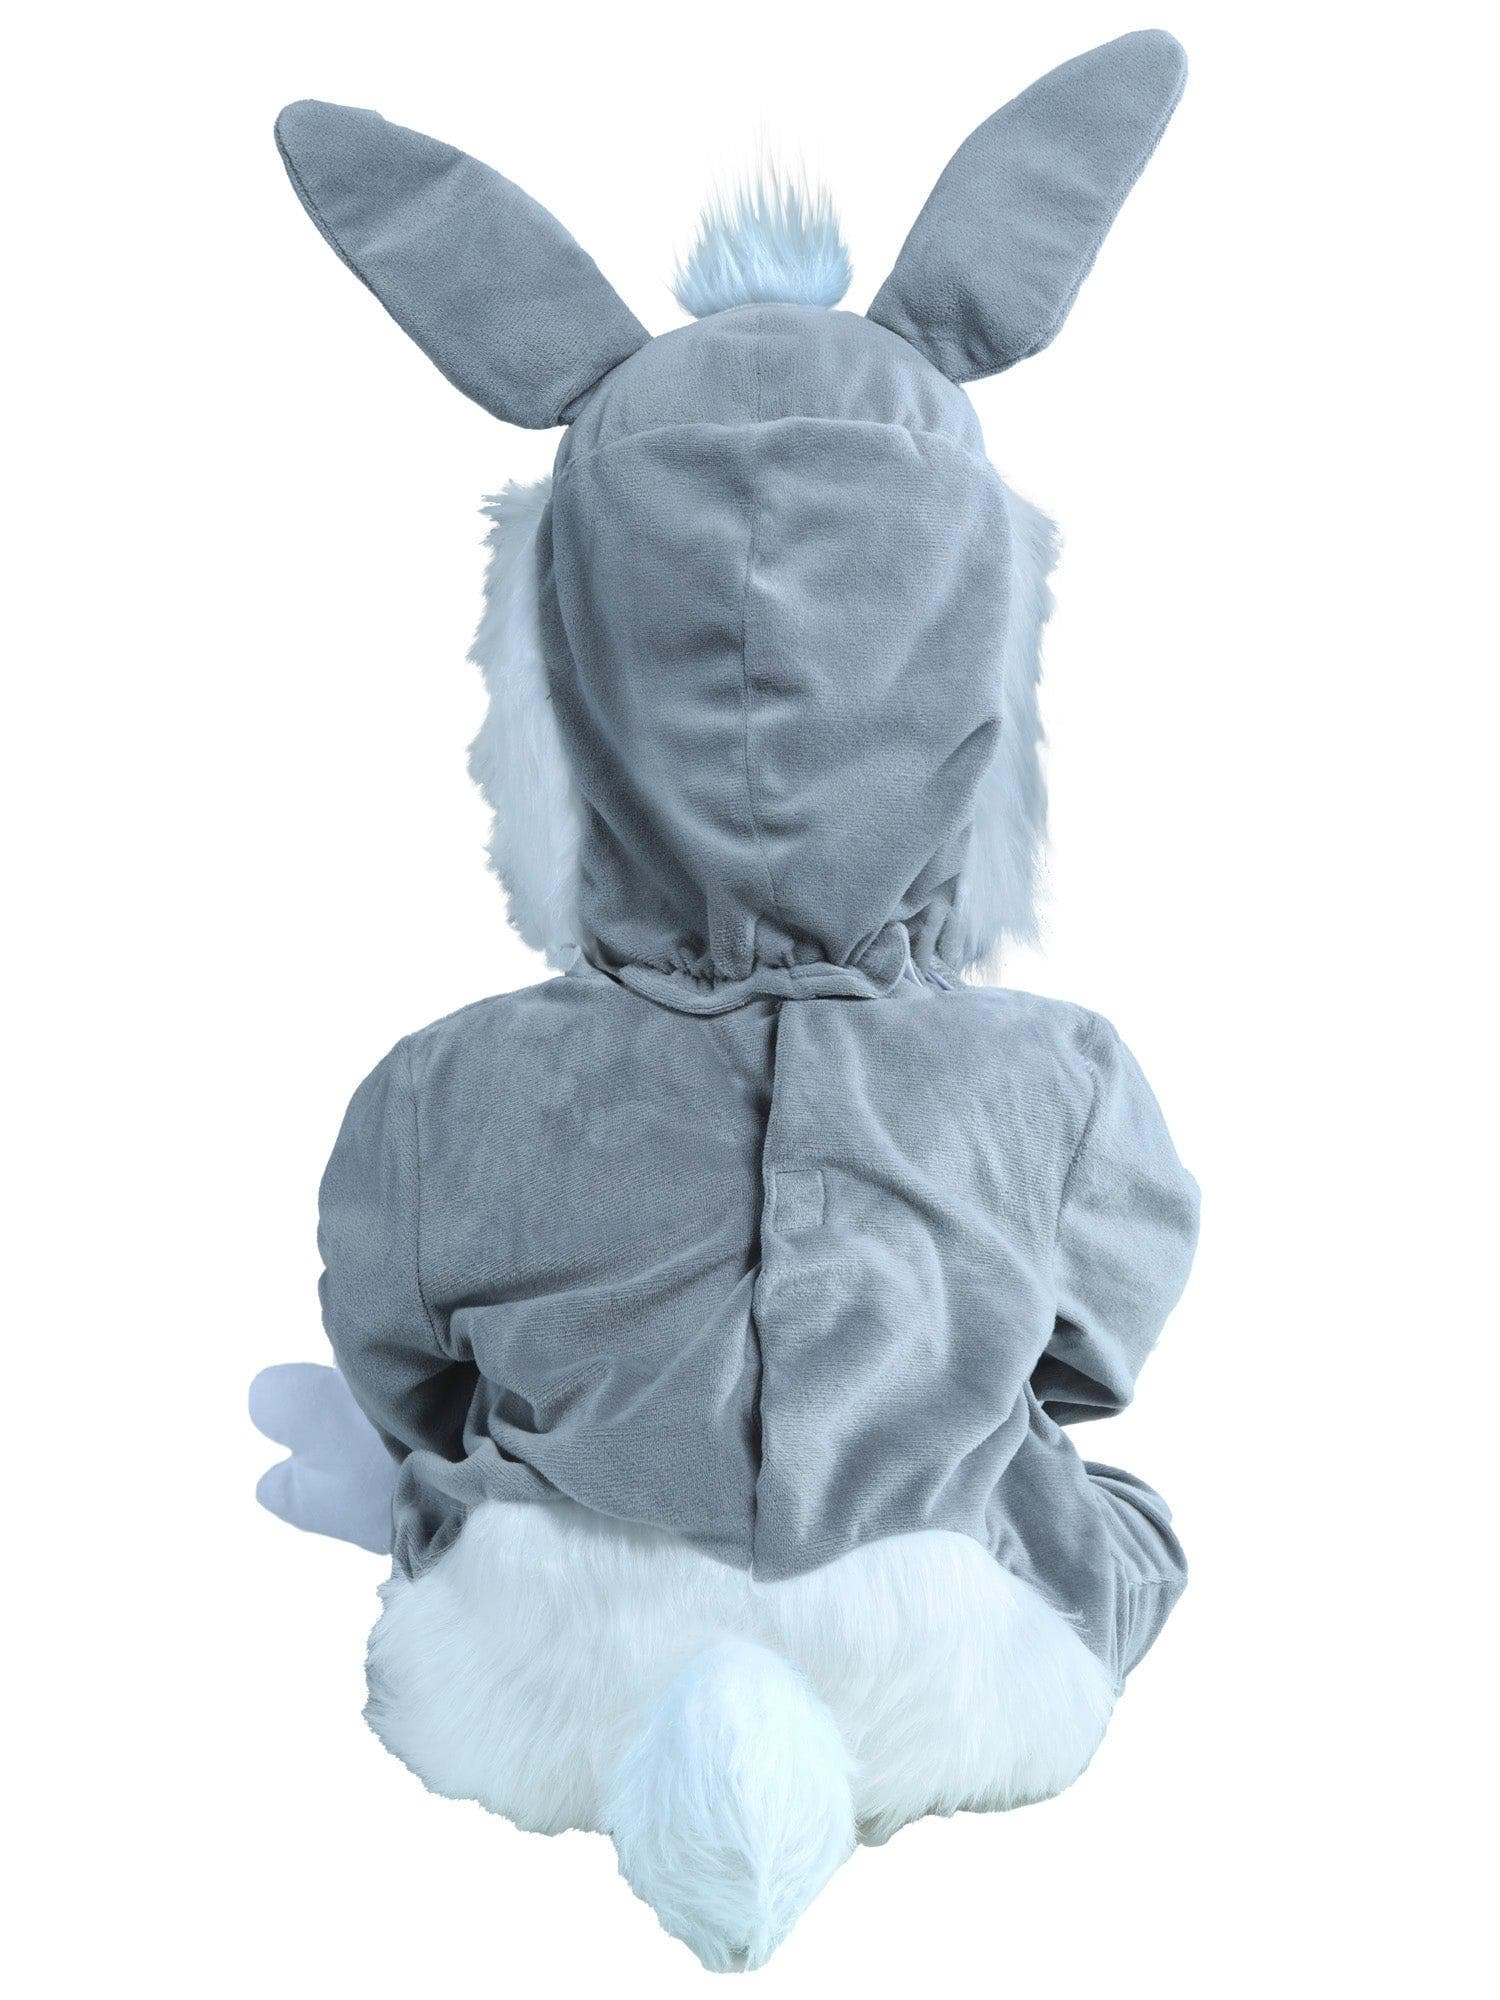 Gray Fluffy Bunny Costume for Babies and Toddlers - costumes.com